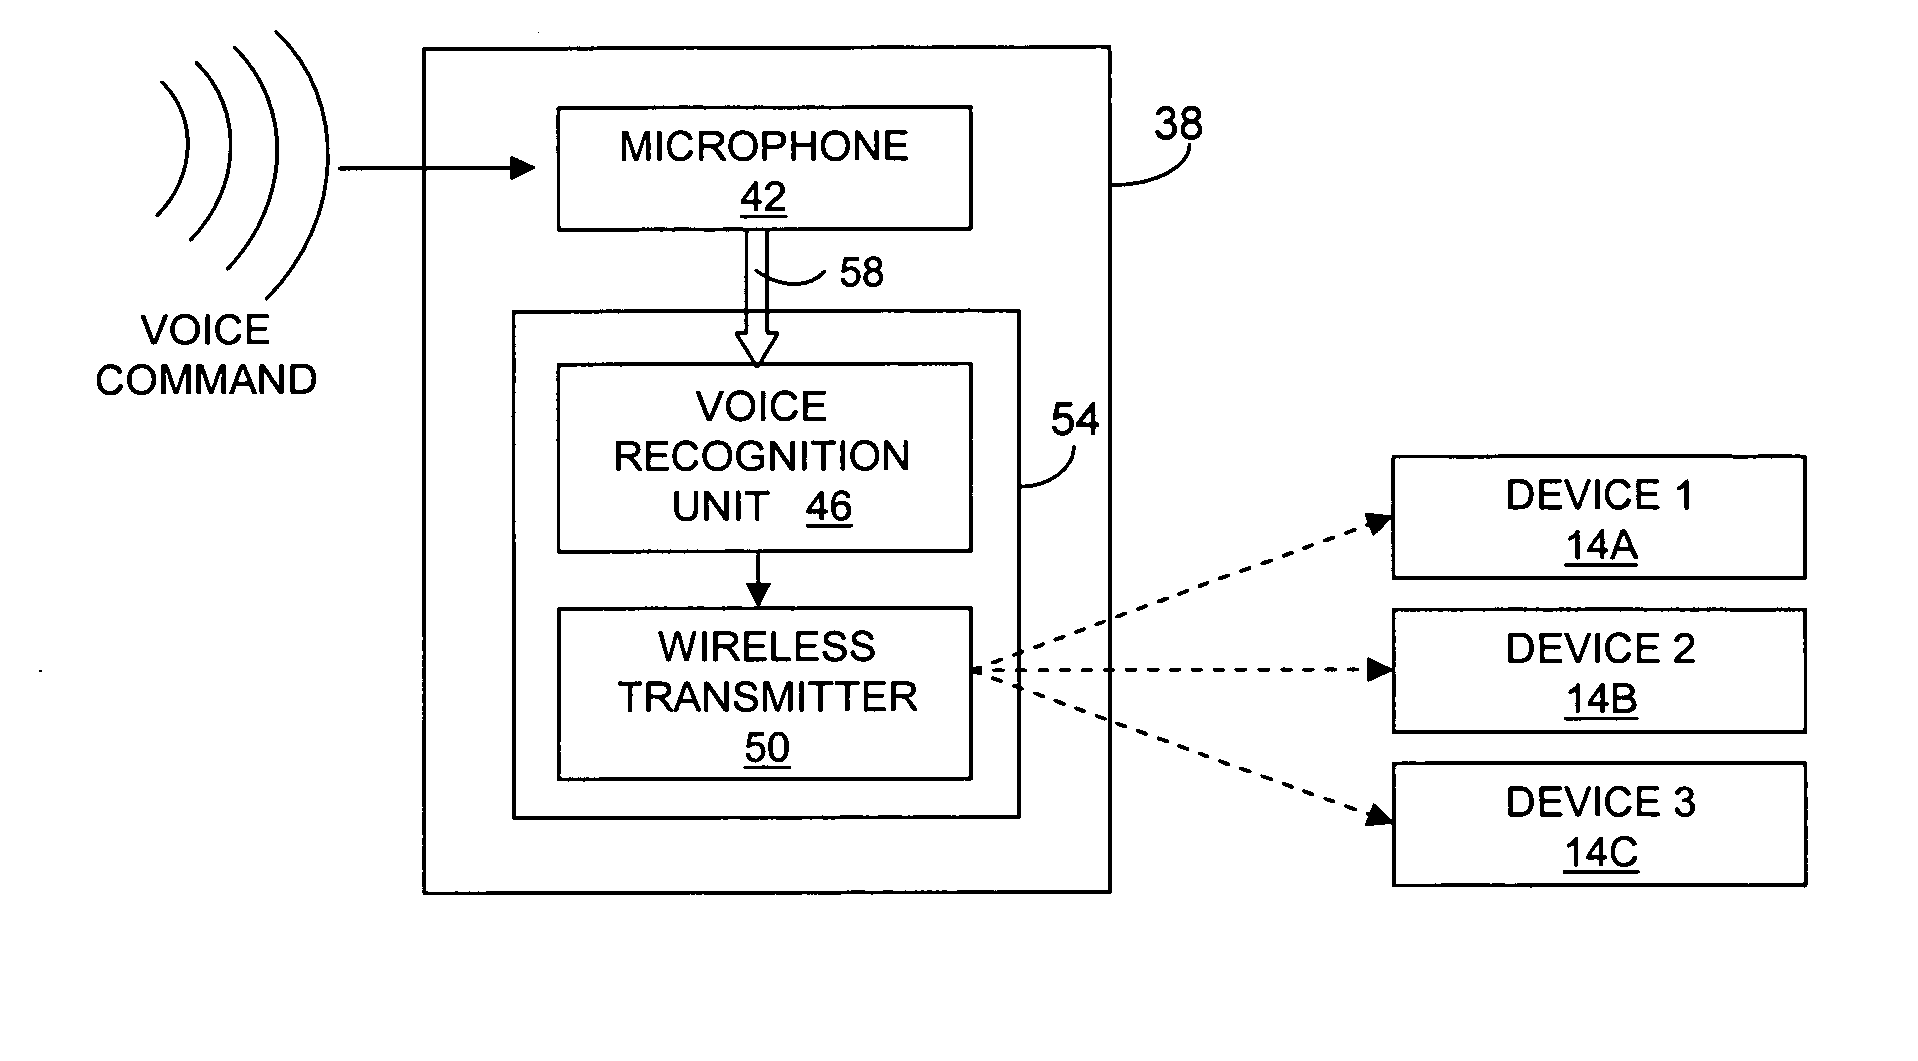 Centralized voice recognition unit for wireless control of personal mobile electronic devices